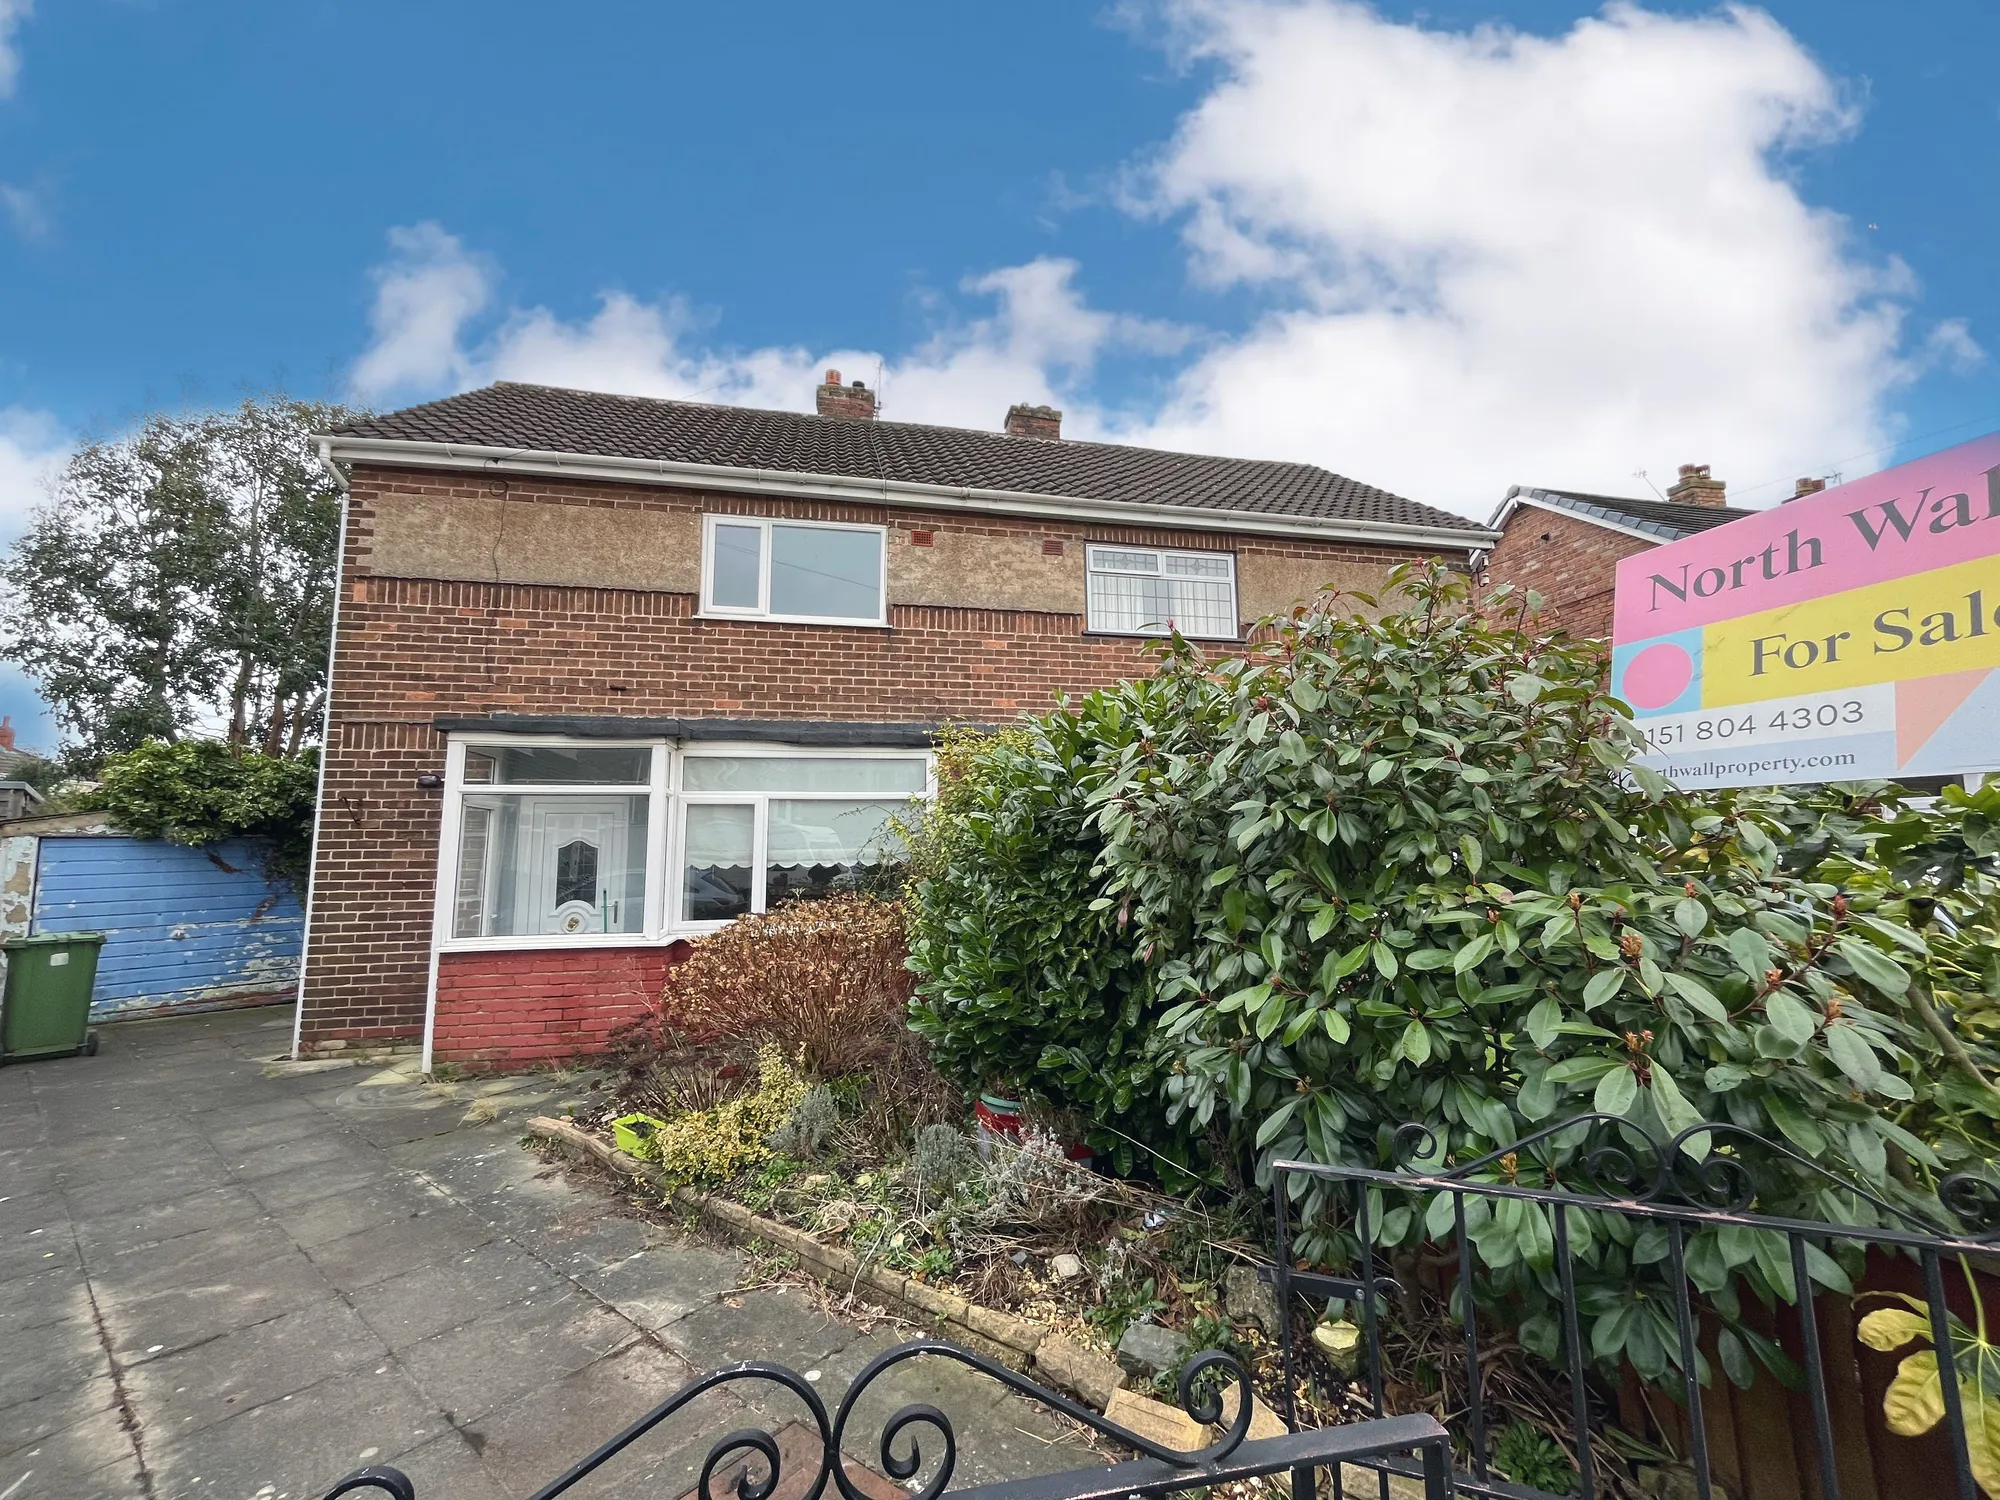 3 bed semi-detached house for sale in Hathaway, Liverpool  - Property Image 1